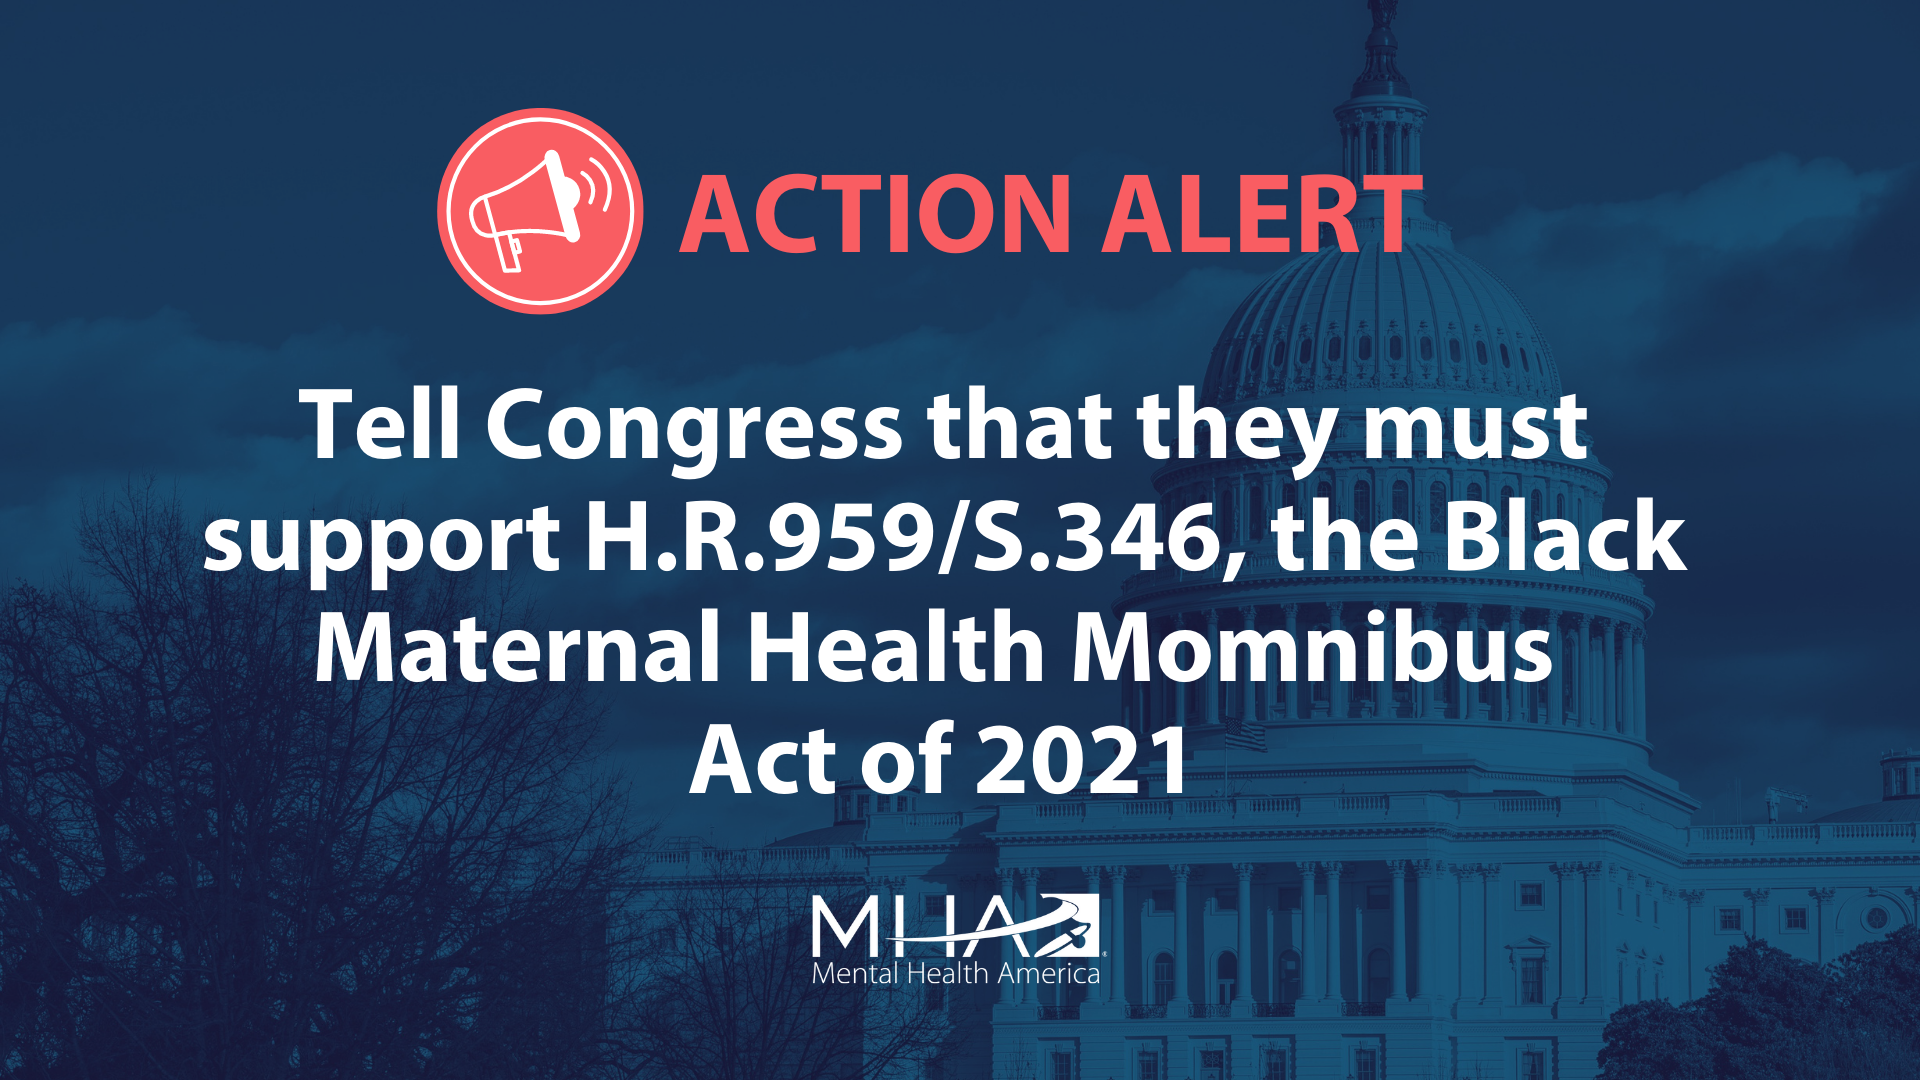 Congress Must Support H.R.959/S.346, the Black Maternal Health Momnibus